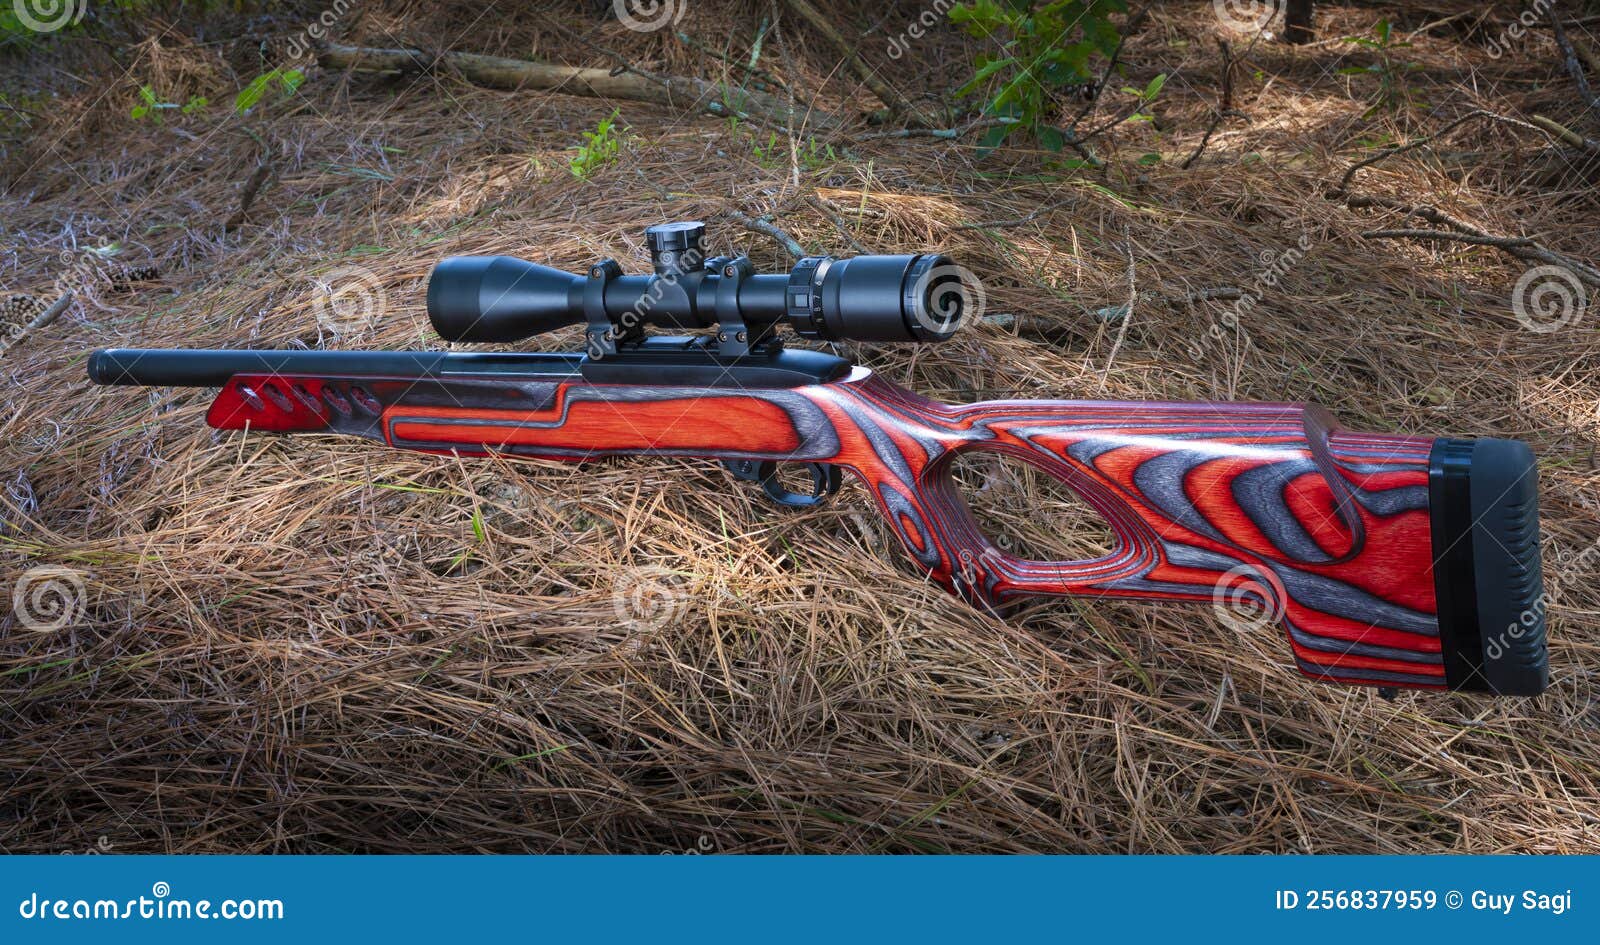 red semi-auto rimfire rifle with optic on the ground